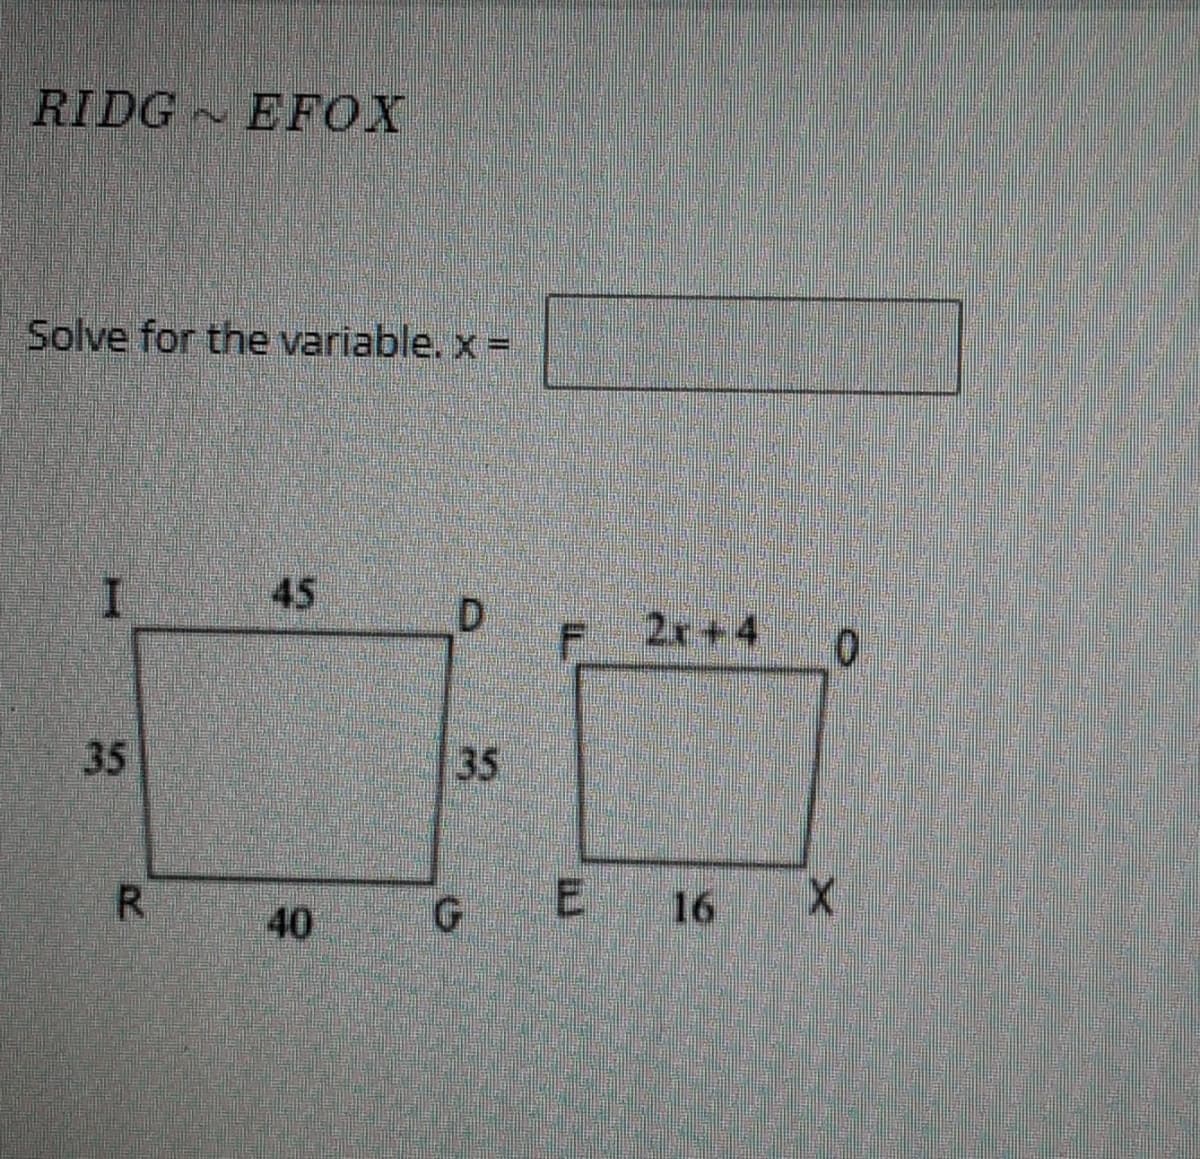 RIDG EFOX
Solve for the variable. x =
45
D F 2x+4
35
35
R
E 16
40
